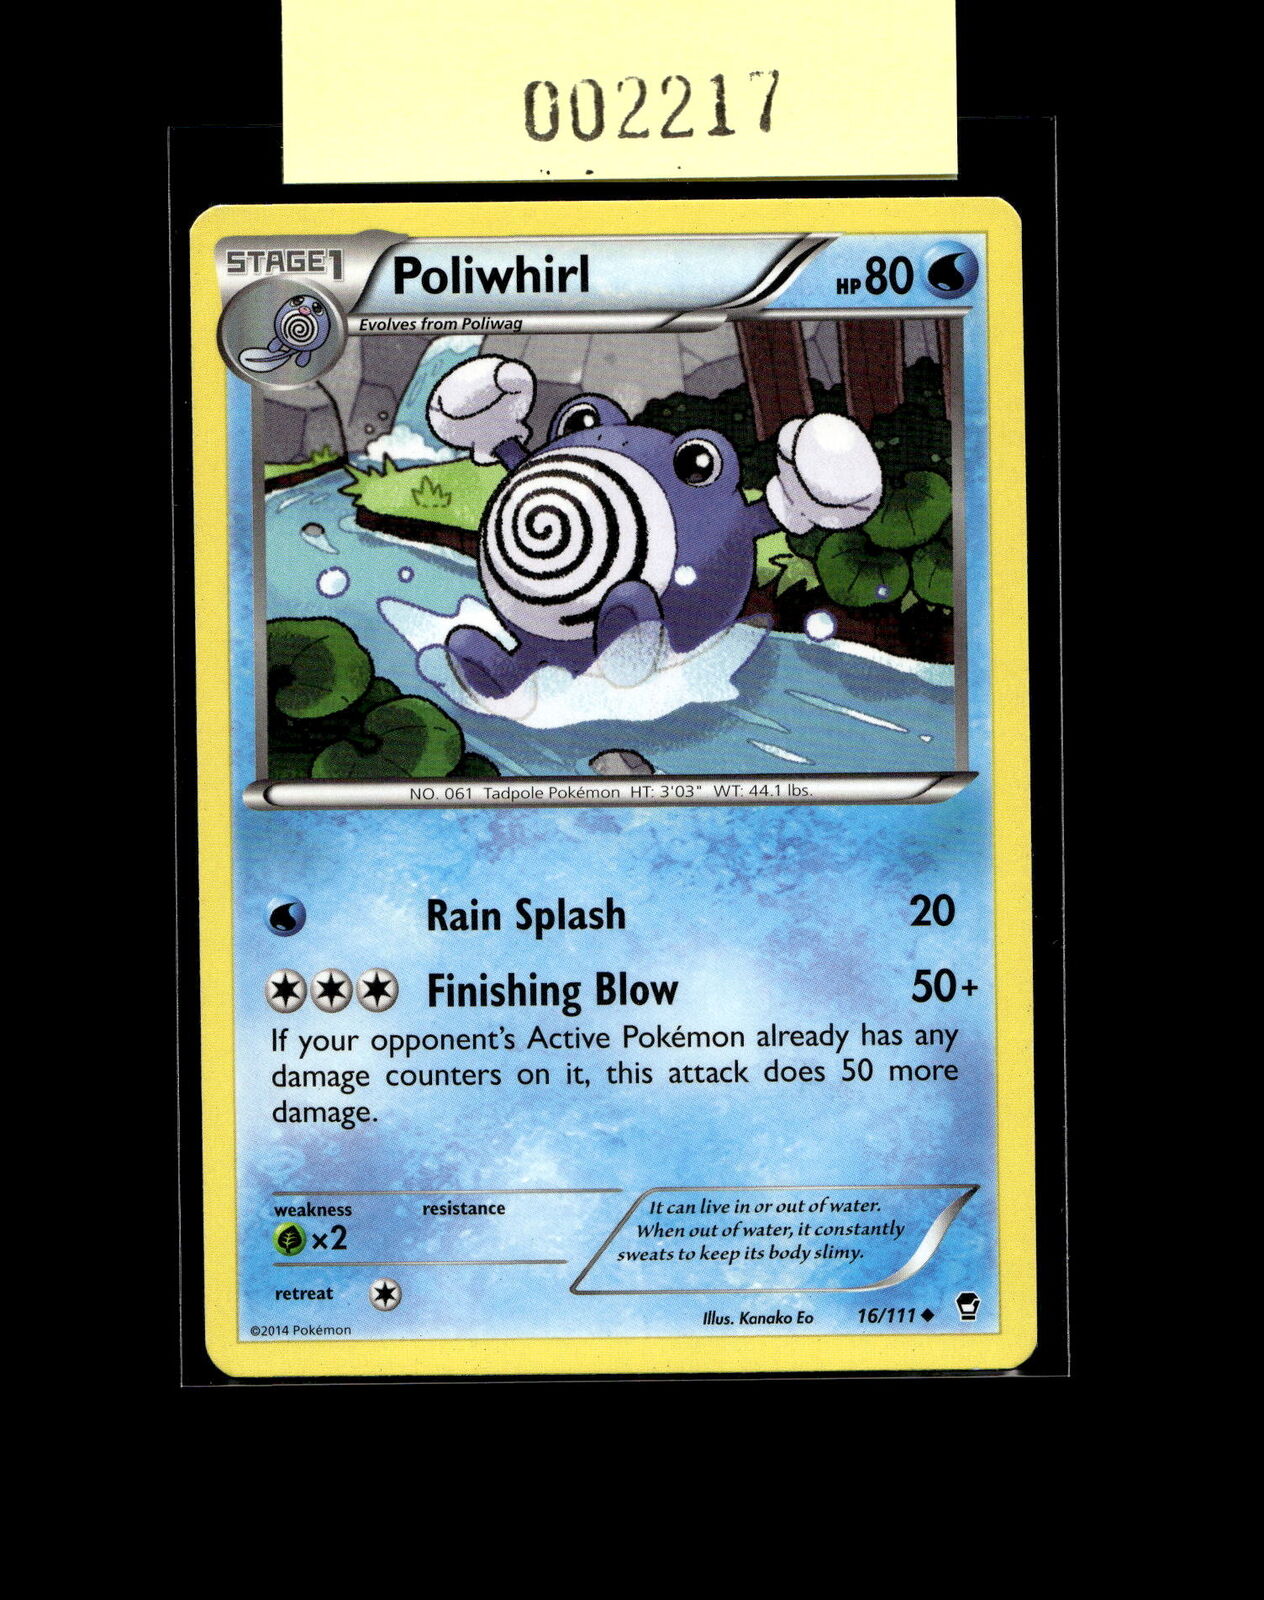 XY - Furious Fists #16/111 Poliwhirl